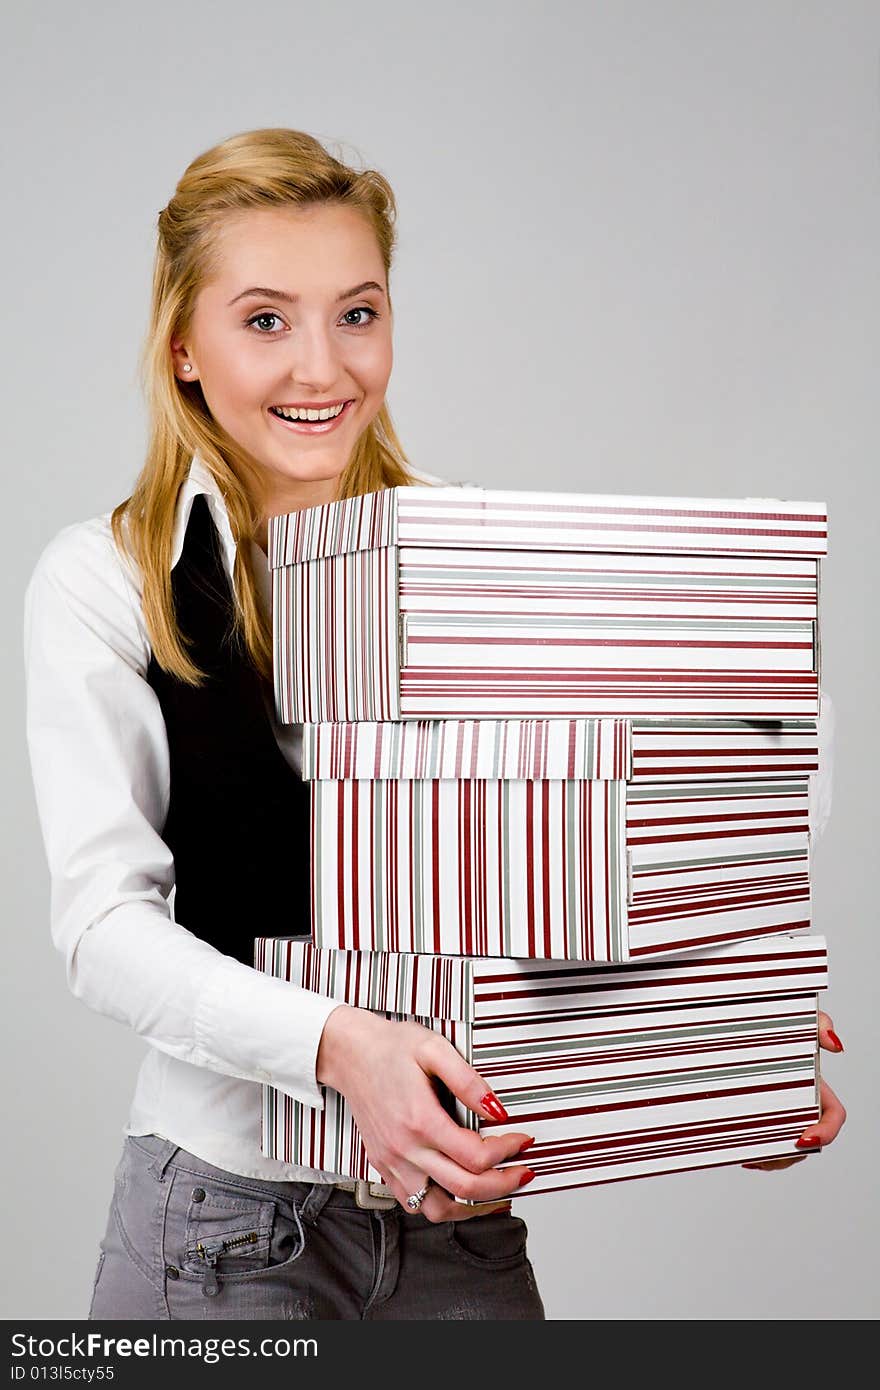 Smiling young woman holding a stack of boxes indoors. Smiling young woman holding a stack of boxes indoors